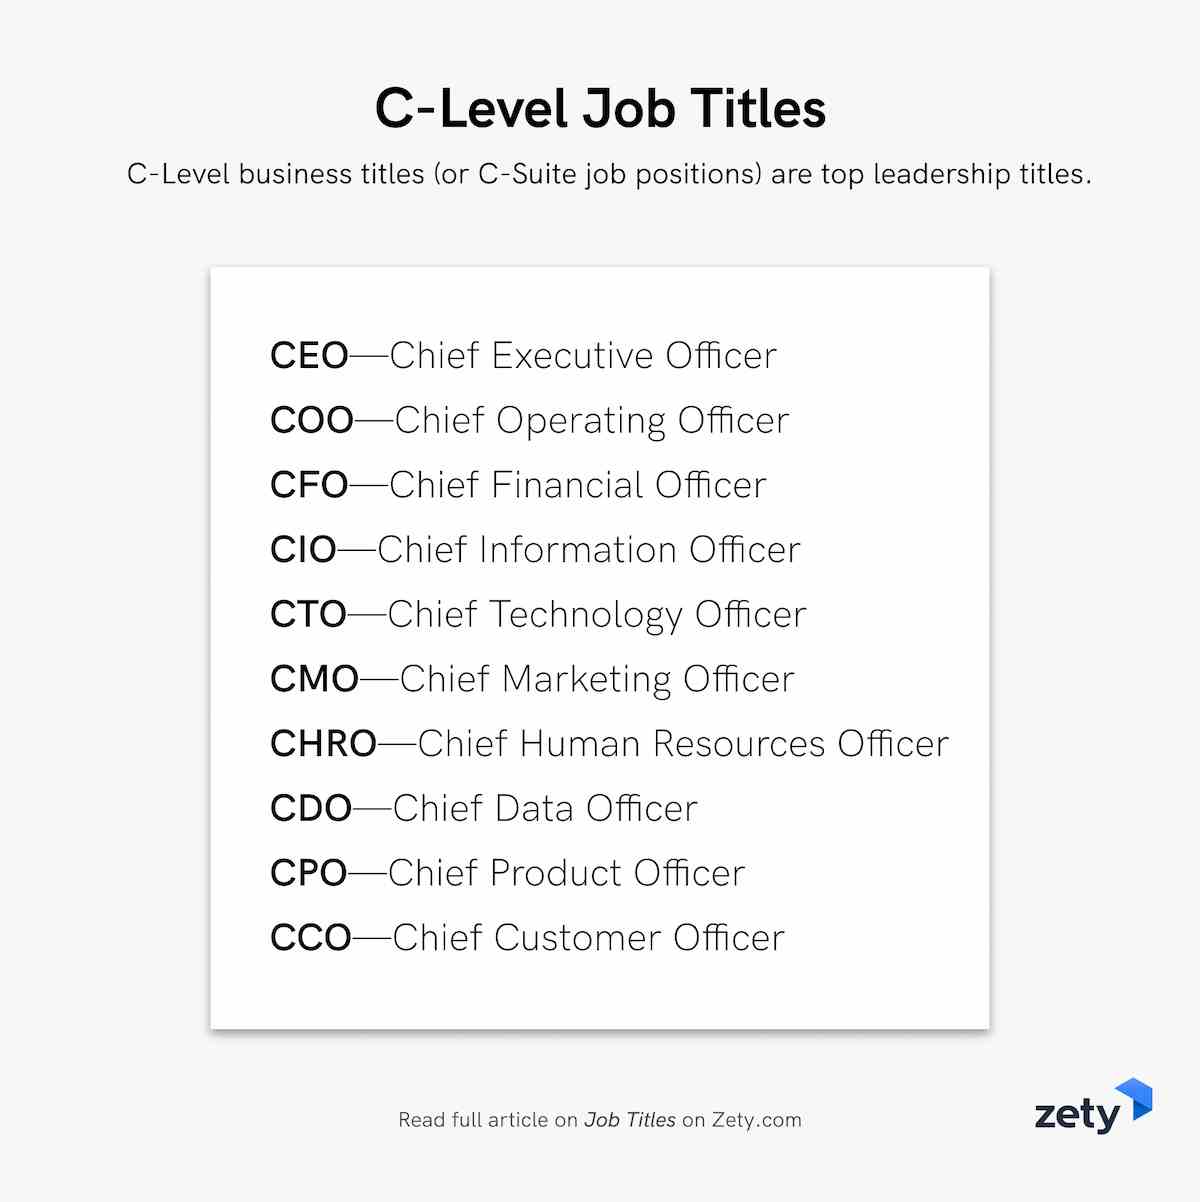 What is your current or most recent job title